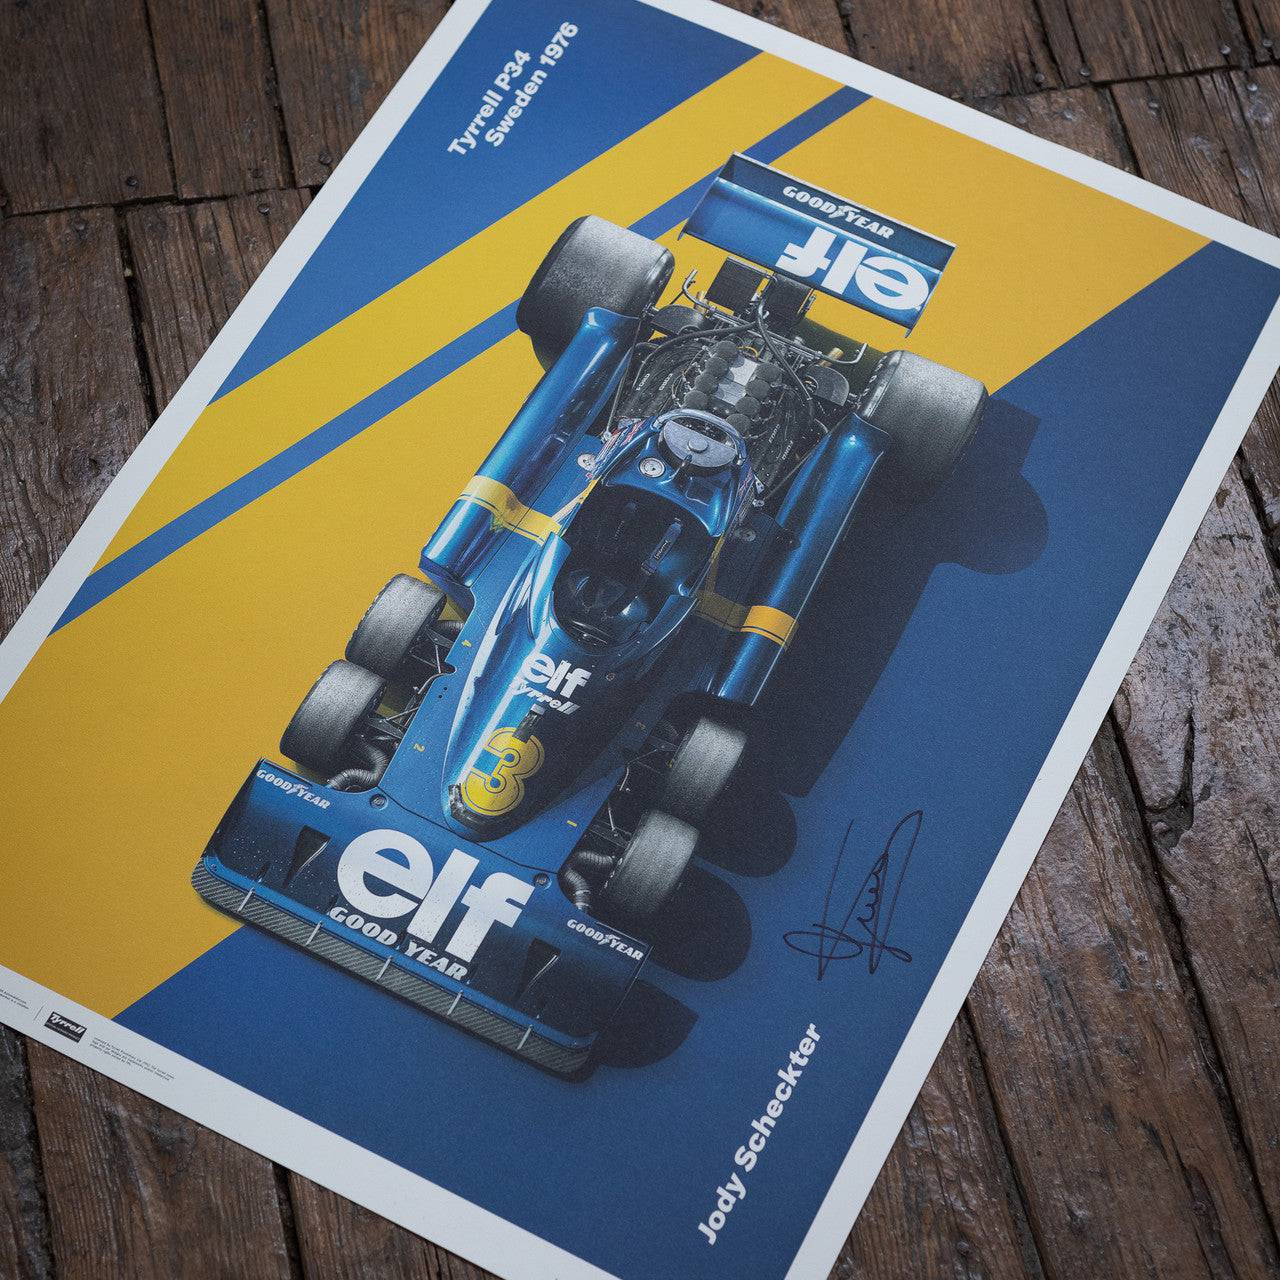 JODY SCHECKTER - TYRRELL P34 AT SWEDISH GRAND PRIX 1976 | SIGNED LIMITED EDITION  | Poster